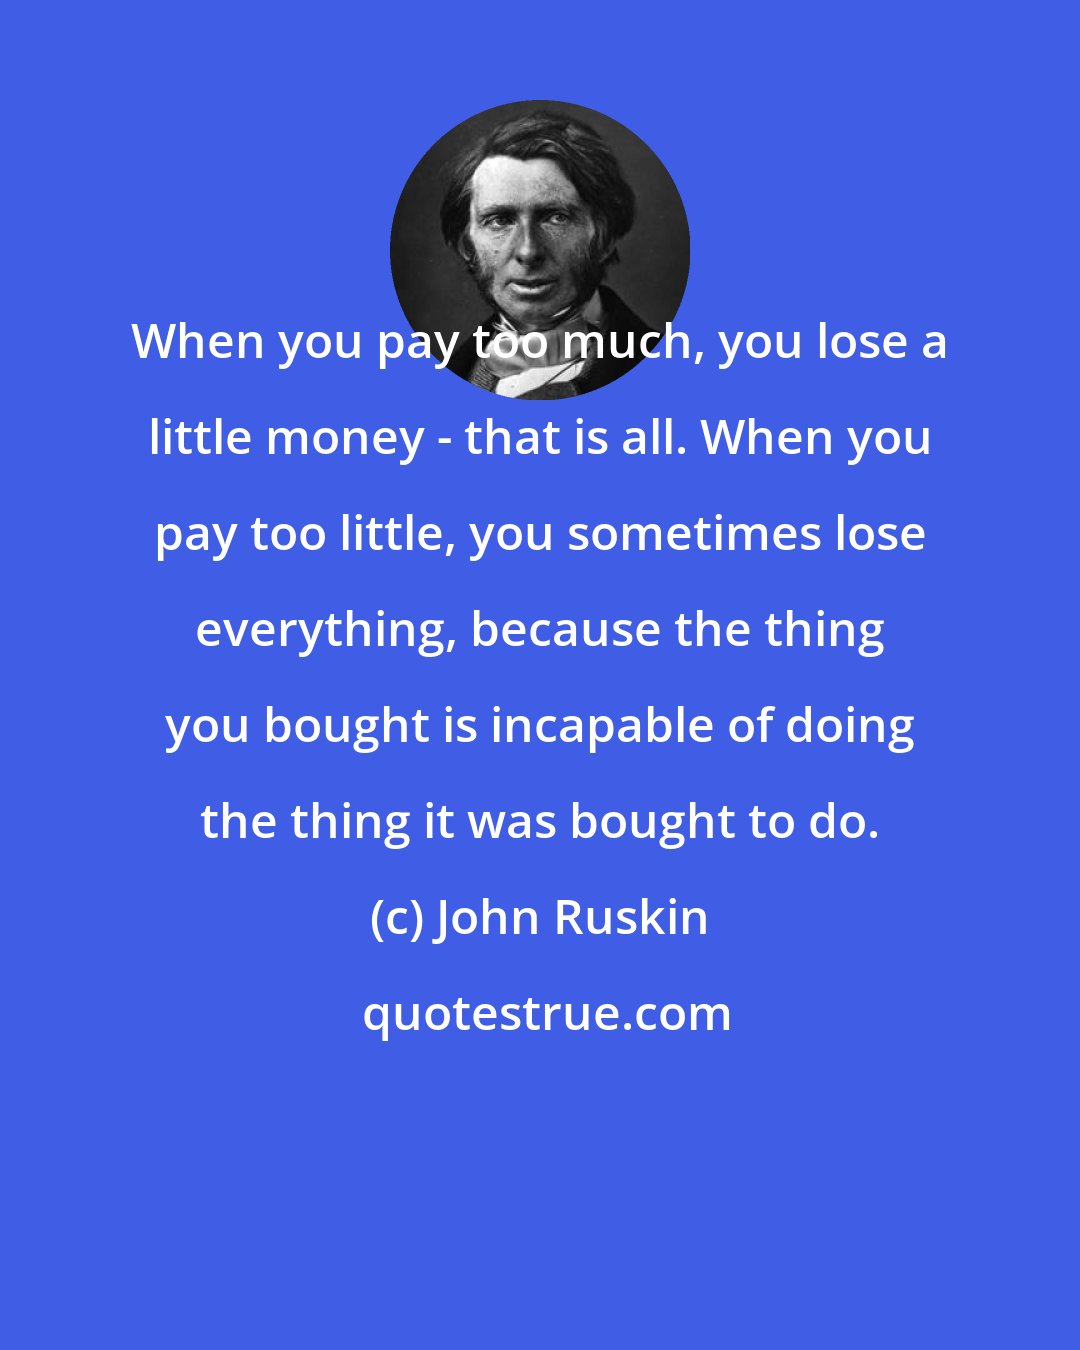 John Ruskin: When you pay too much, you lose a little money - that is all. When you pay too little, you sometimes lose everything, because the thing you bought is incapable of doing the thing it was bought to do.